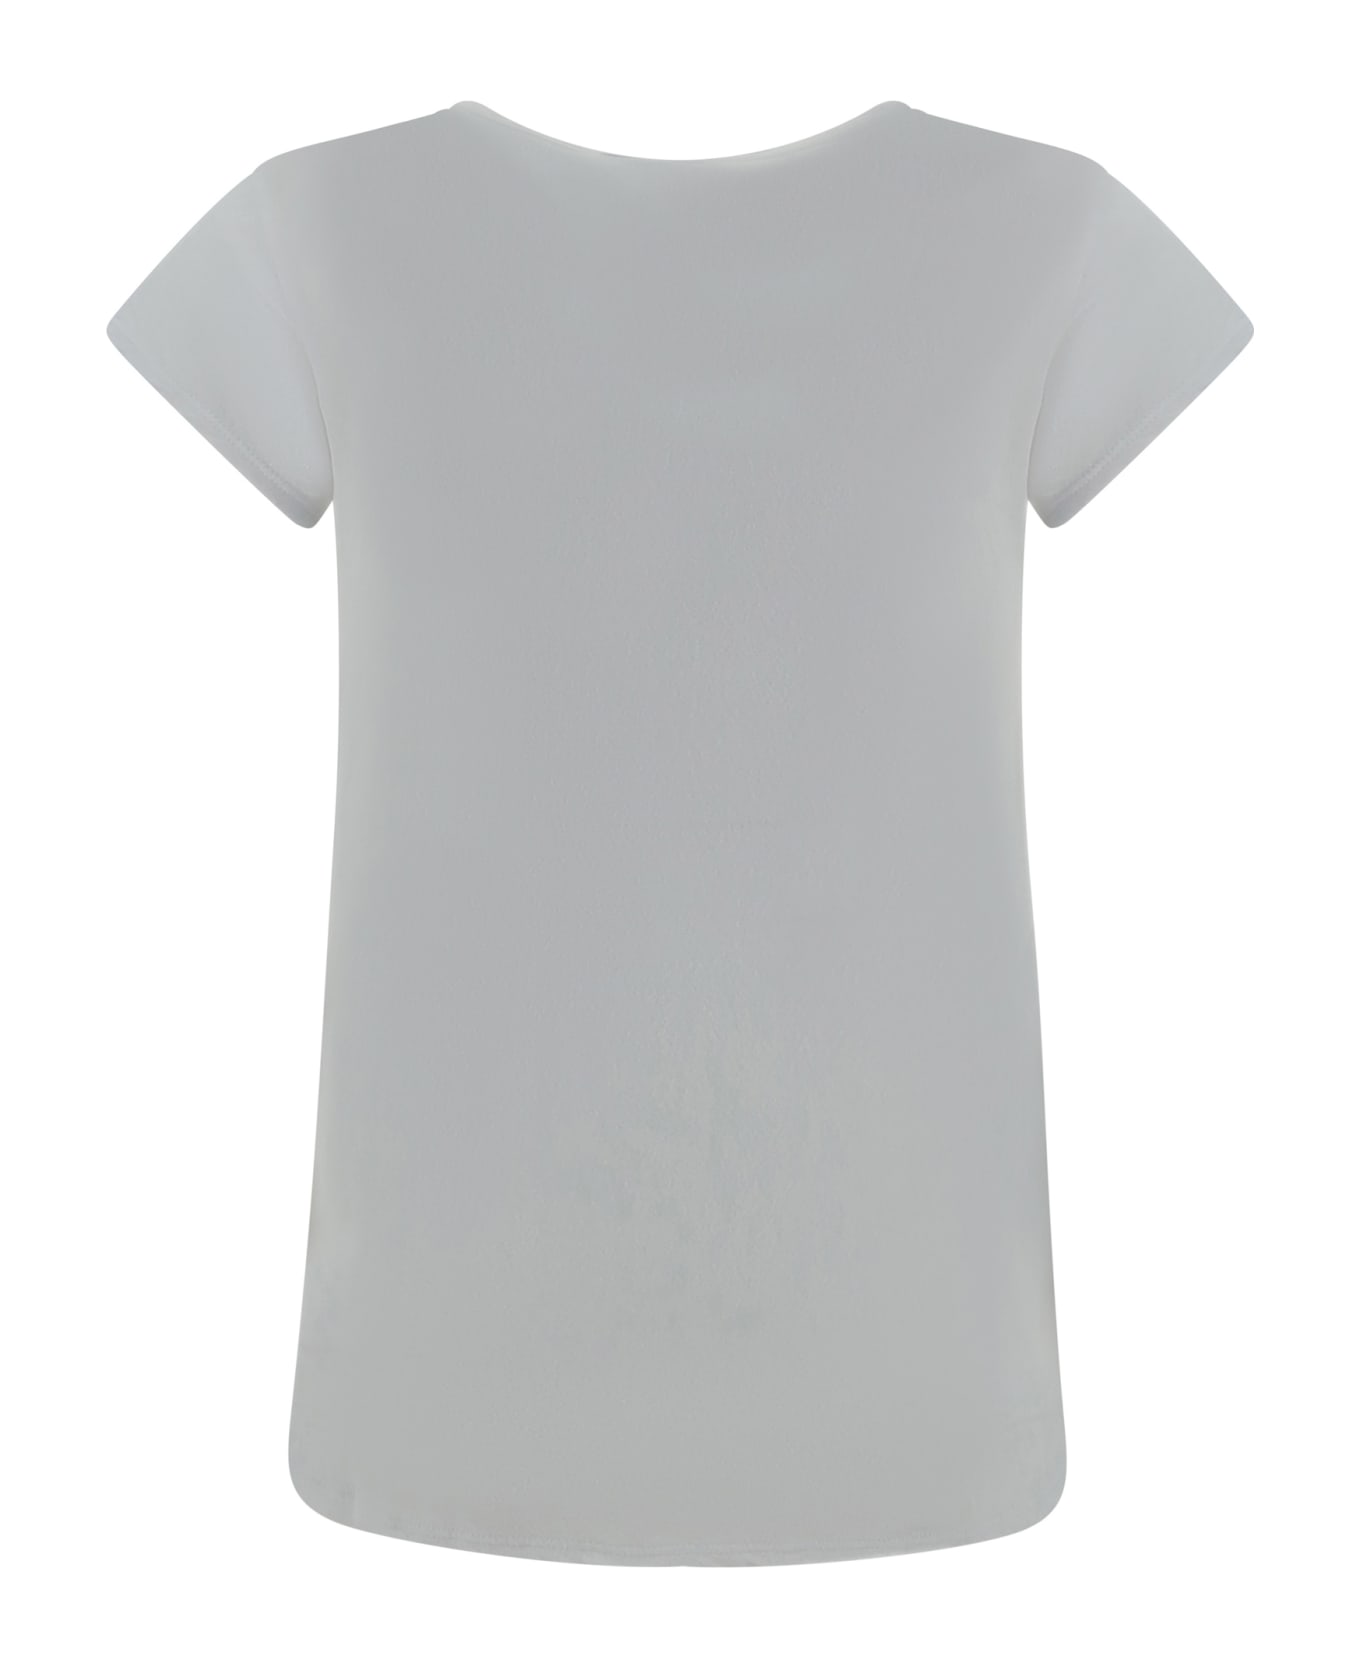 James Perse T-shirt - White Tシャツ